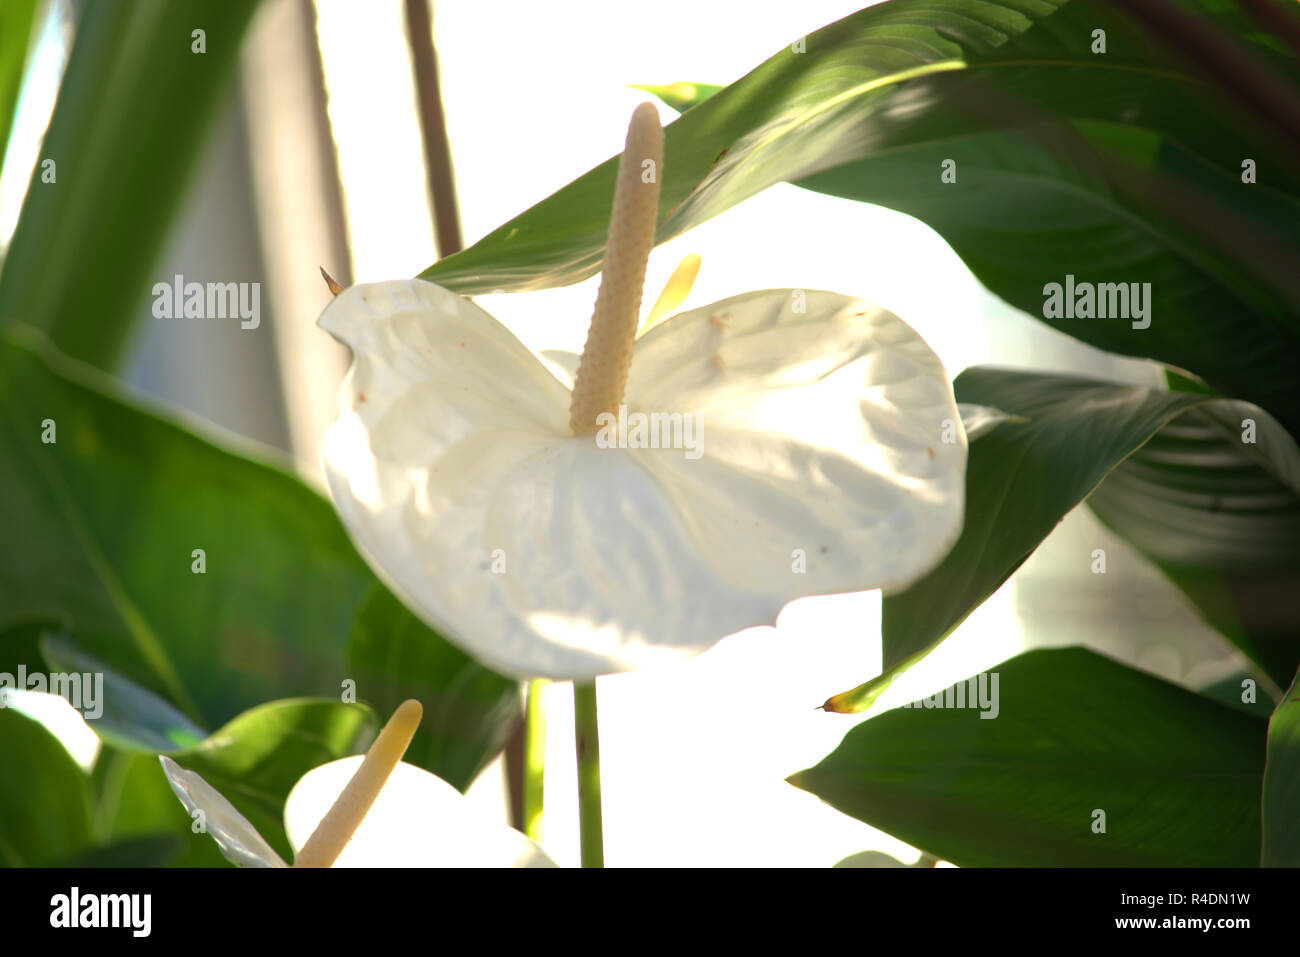 White spathiphyllum or Peace lily Stock Photo